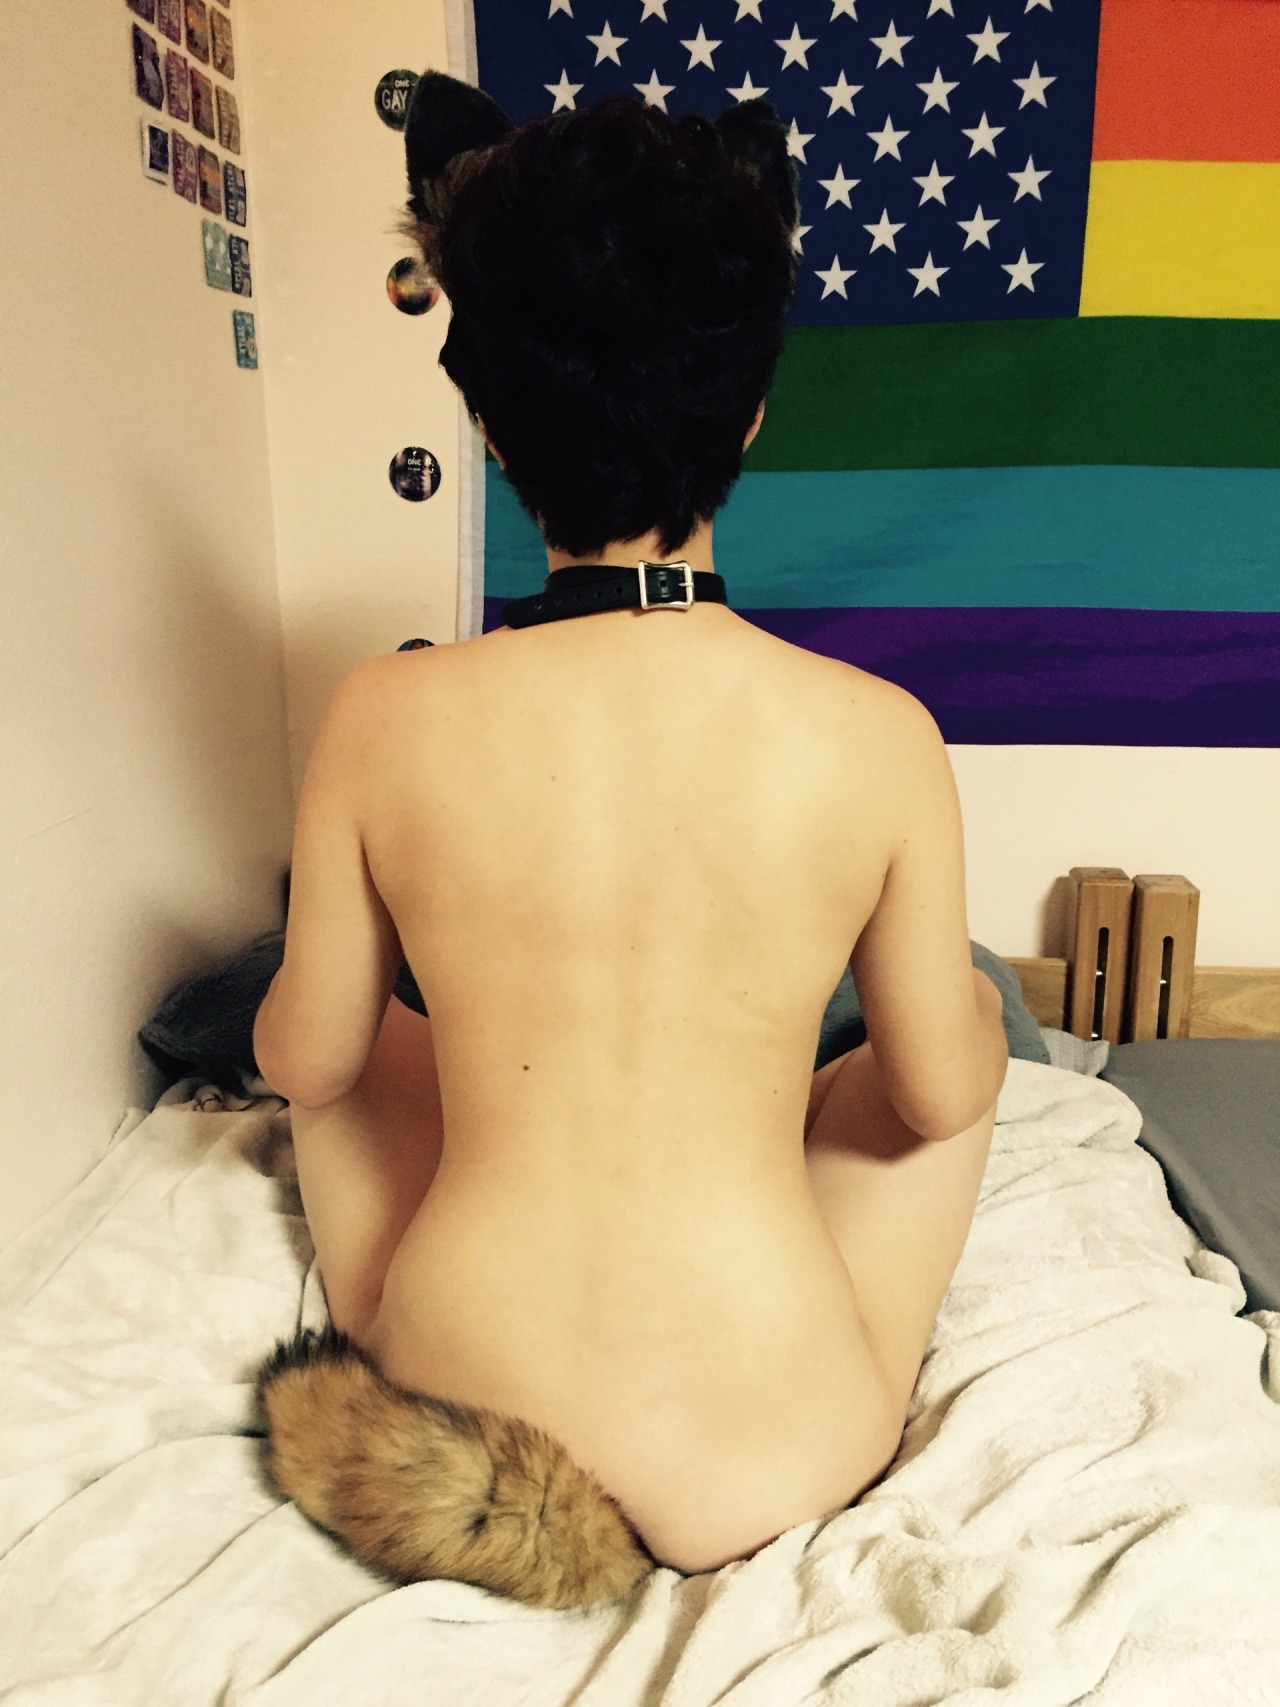 puppys-foxhole:  Finally showing off my red fox tail from the Spank Academy. I feel